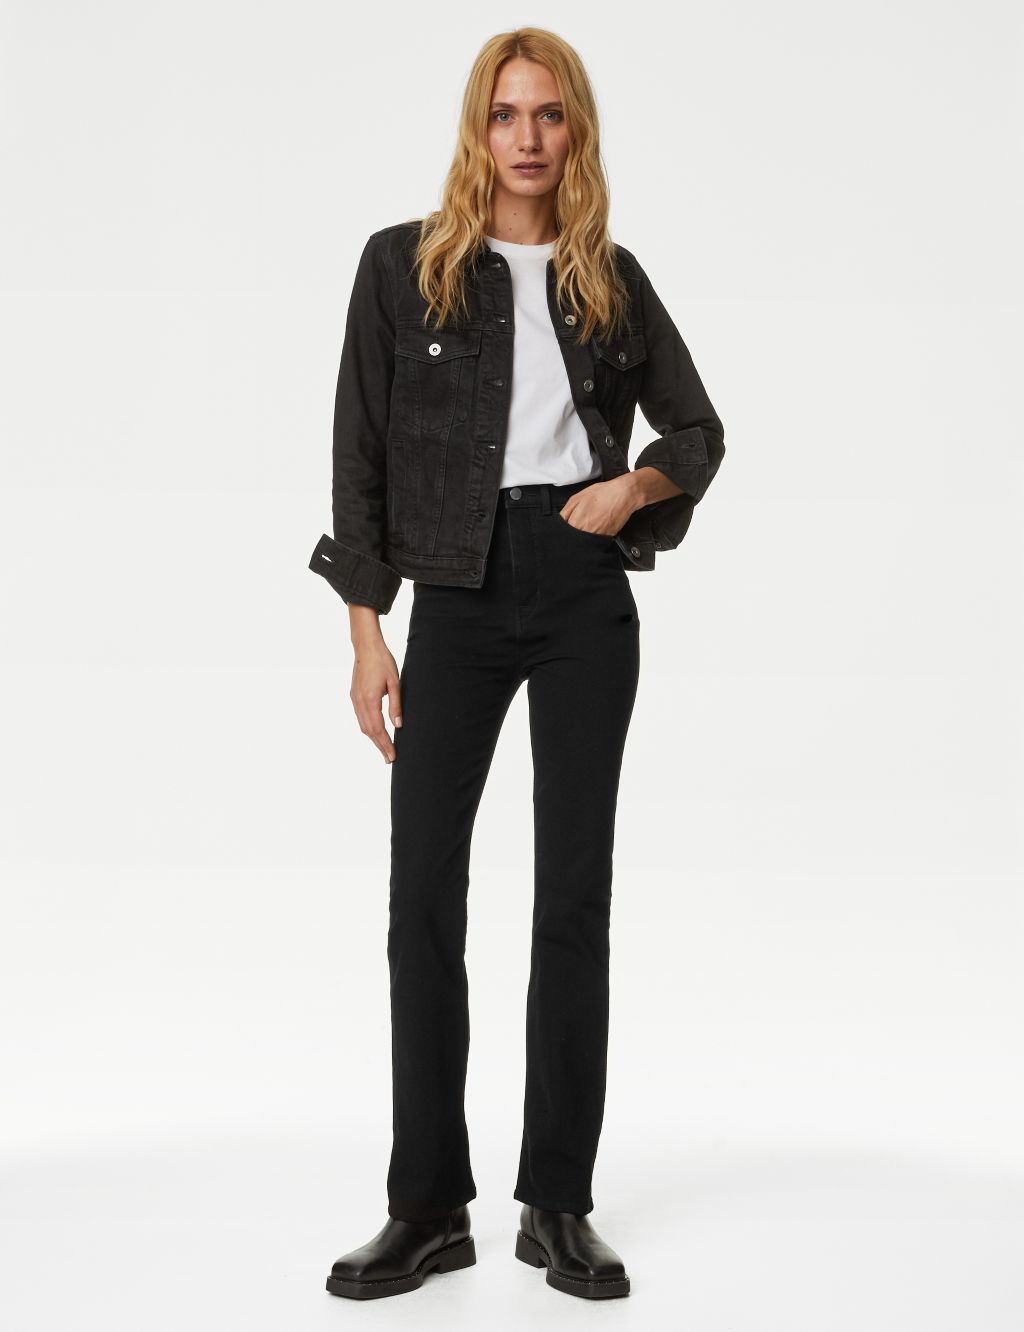 Tall Women's Flared Trousers